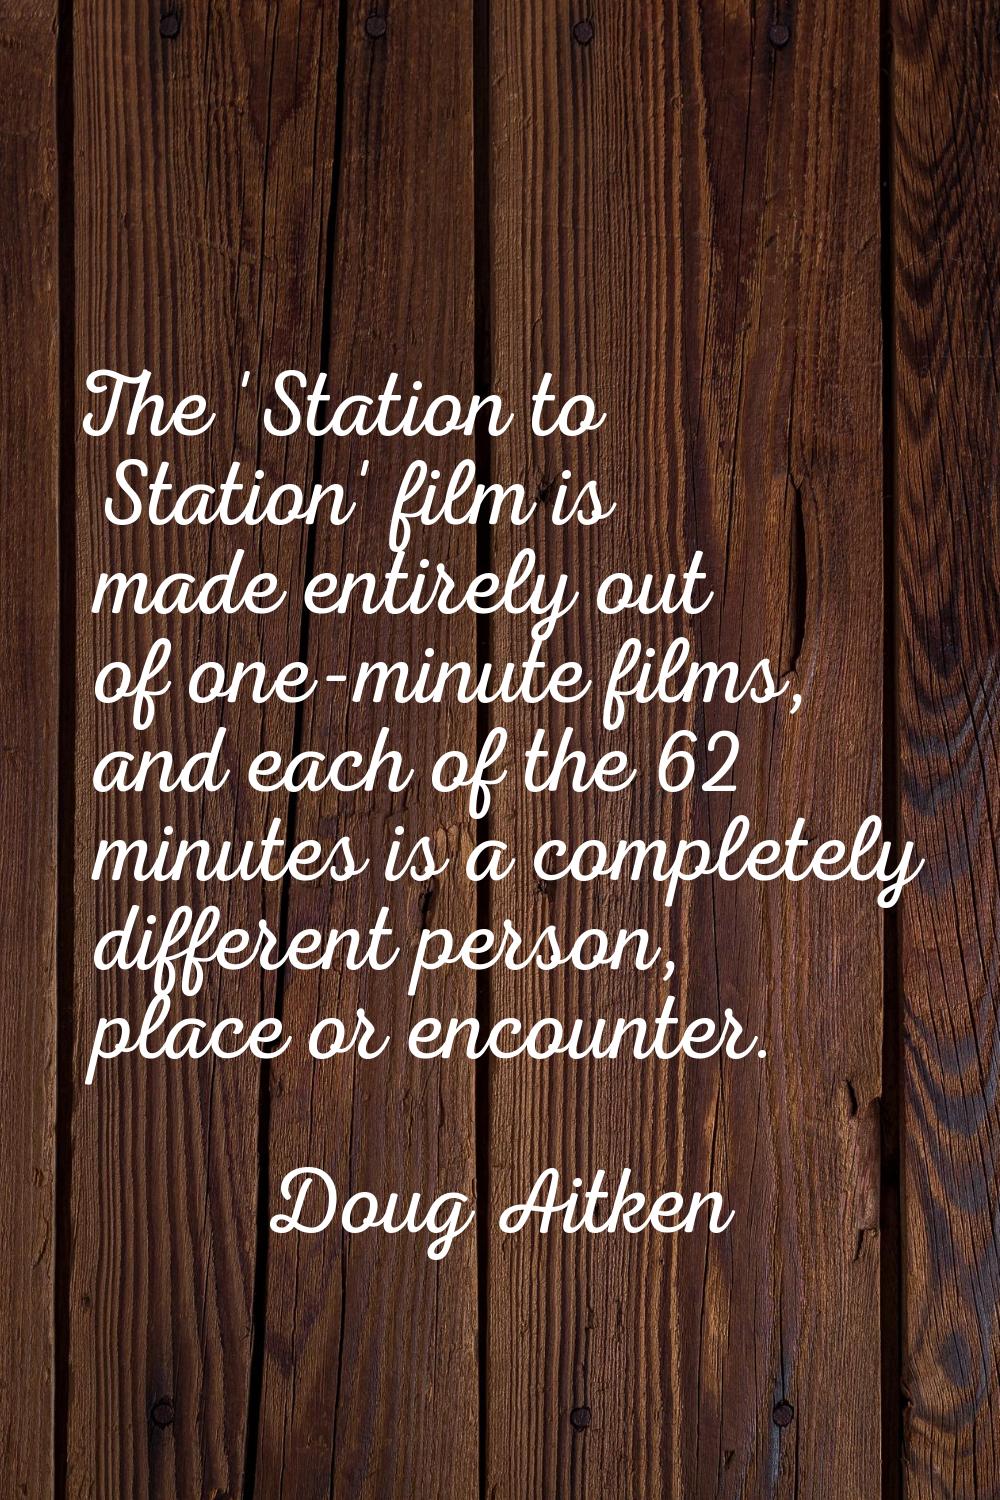 The 'Station to Station' film is made entirely out of one-minute films, and each of the 62 minutes 